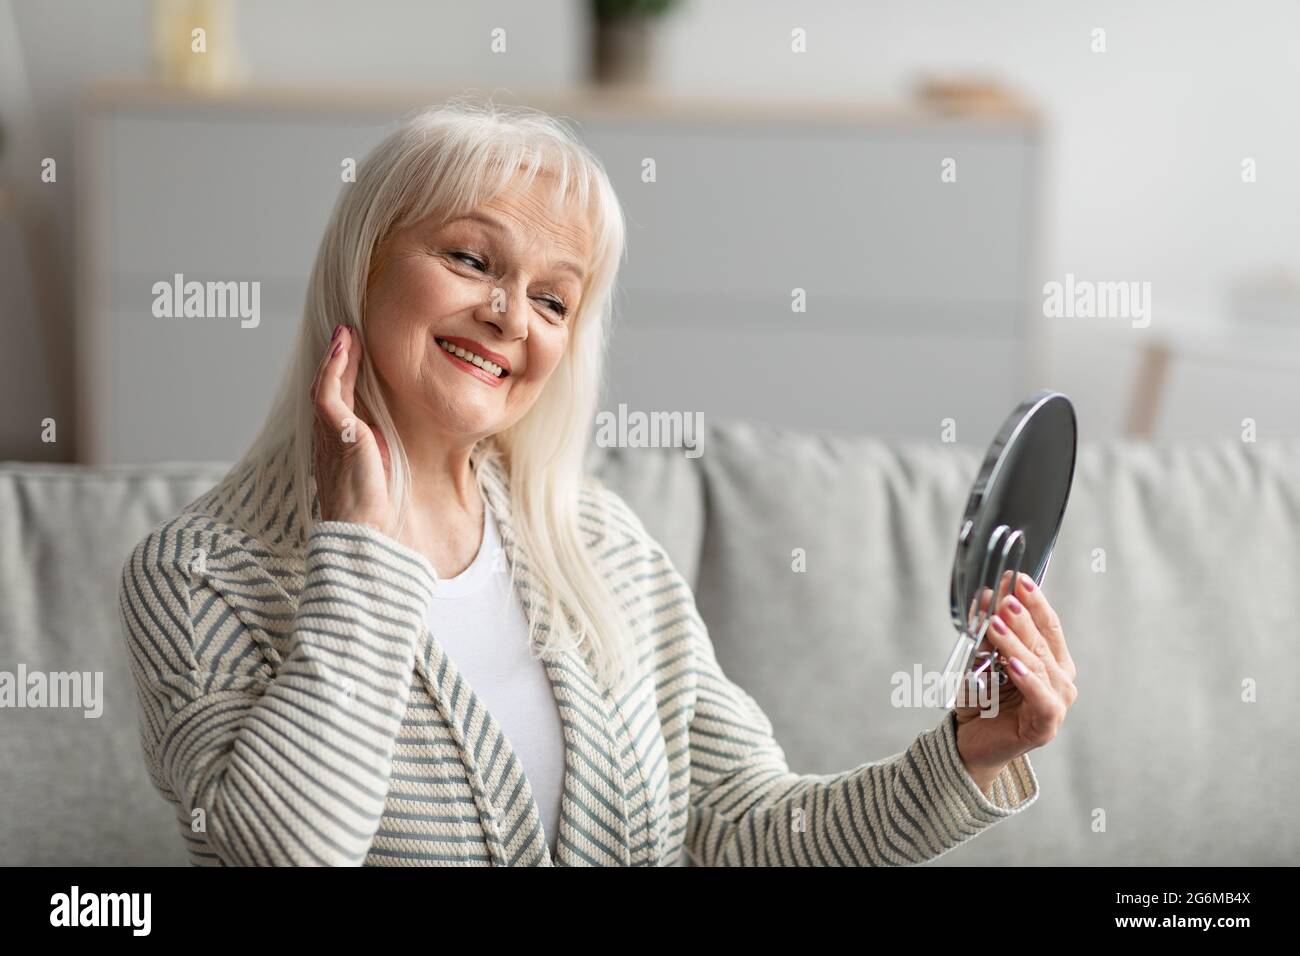 Smiling mature woman checking her face looking in mirror Stock Photo